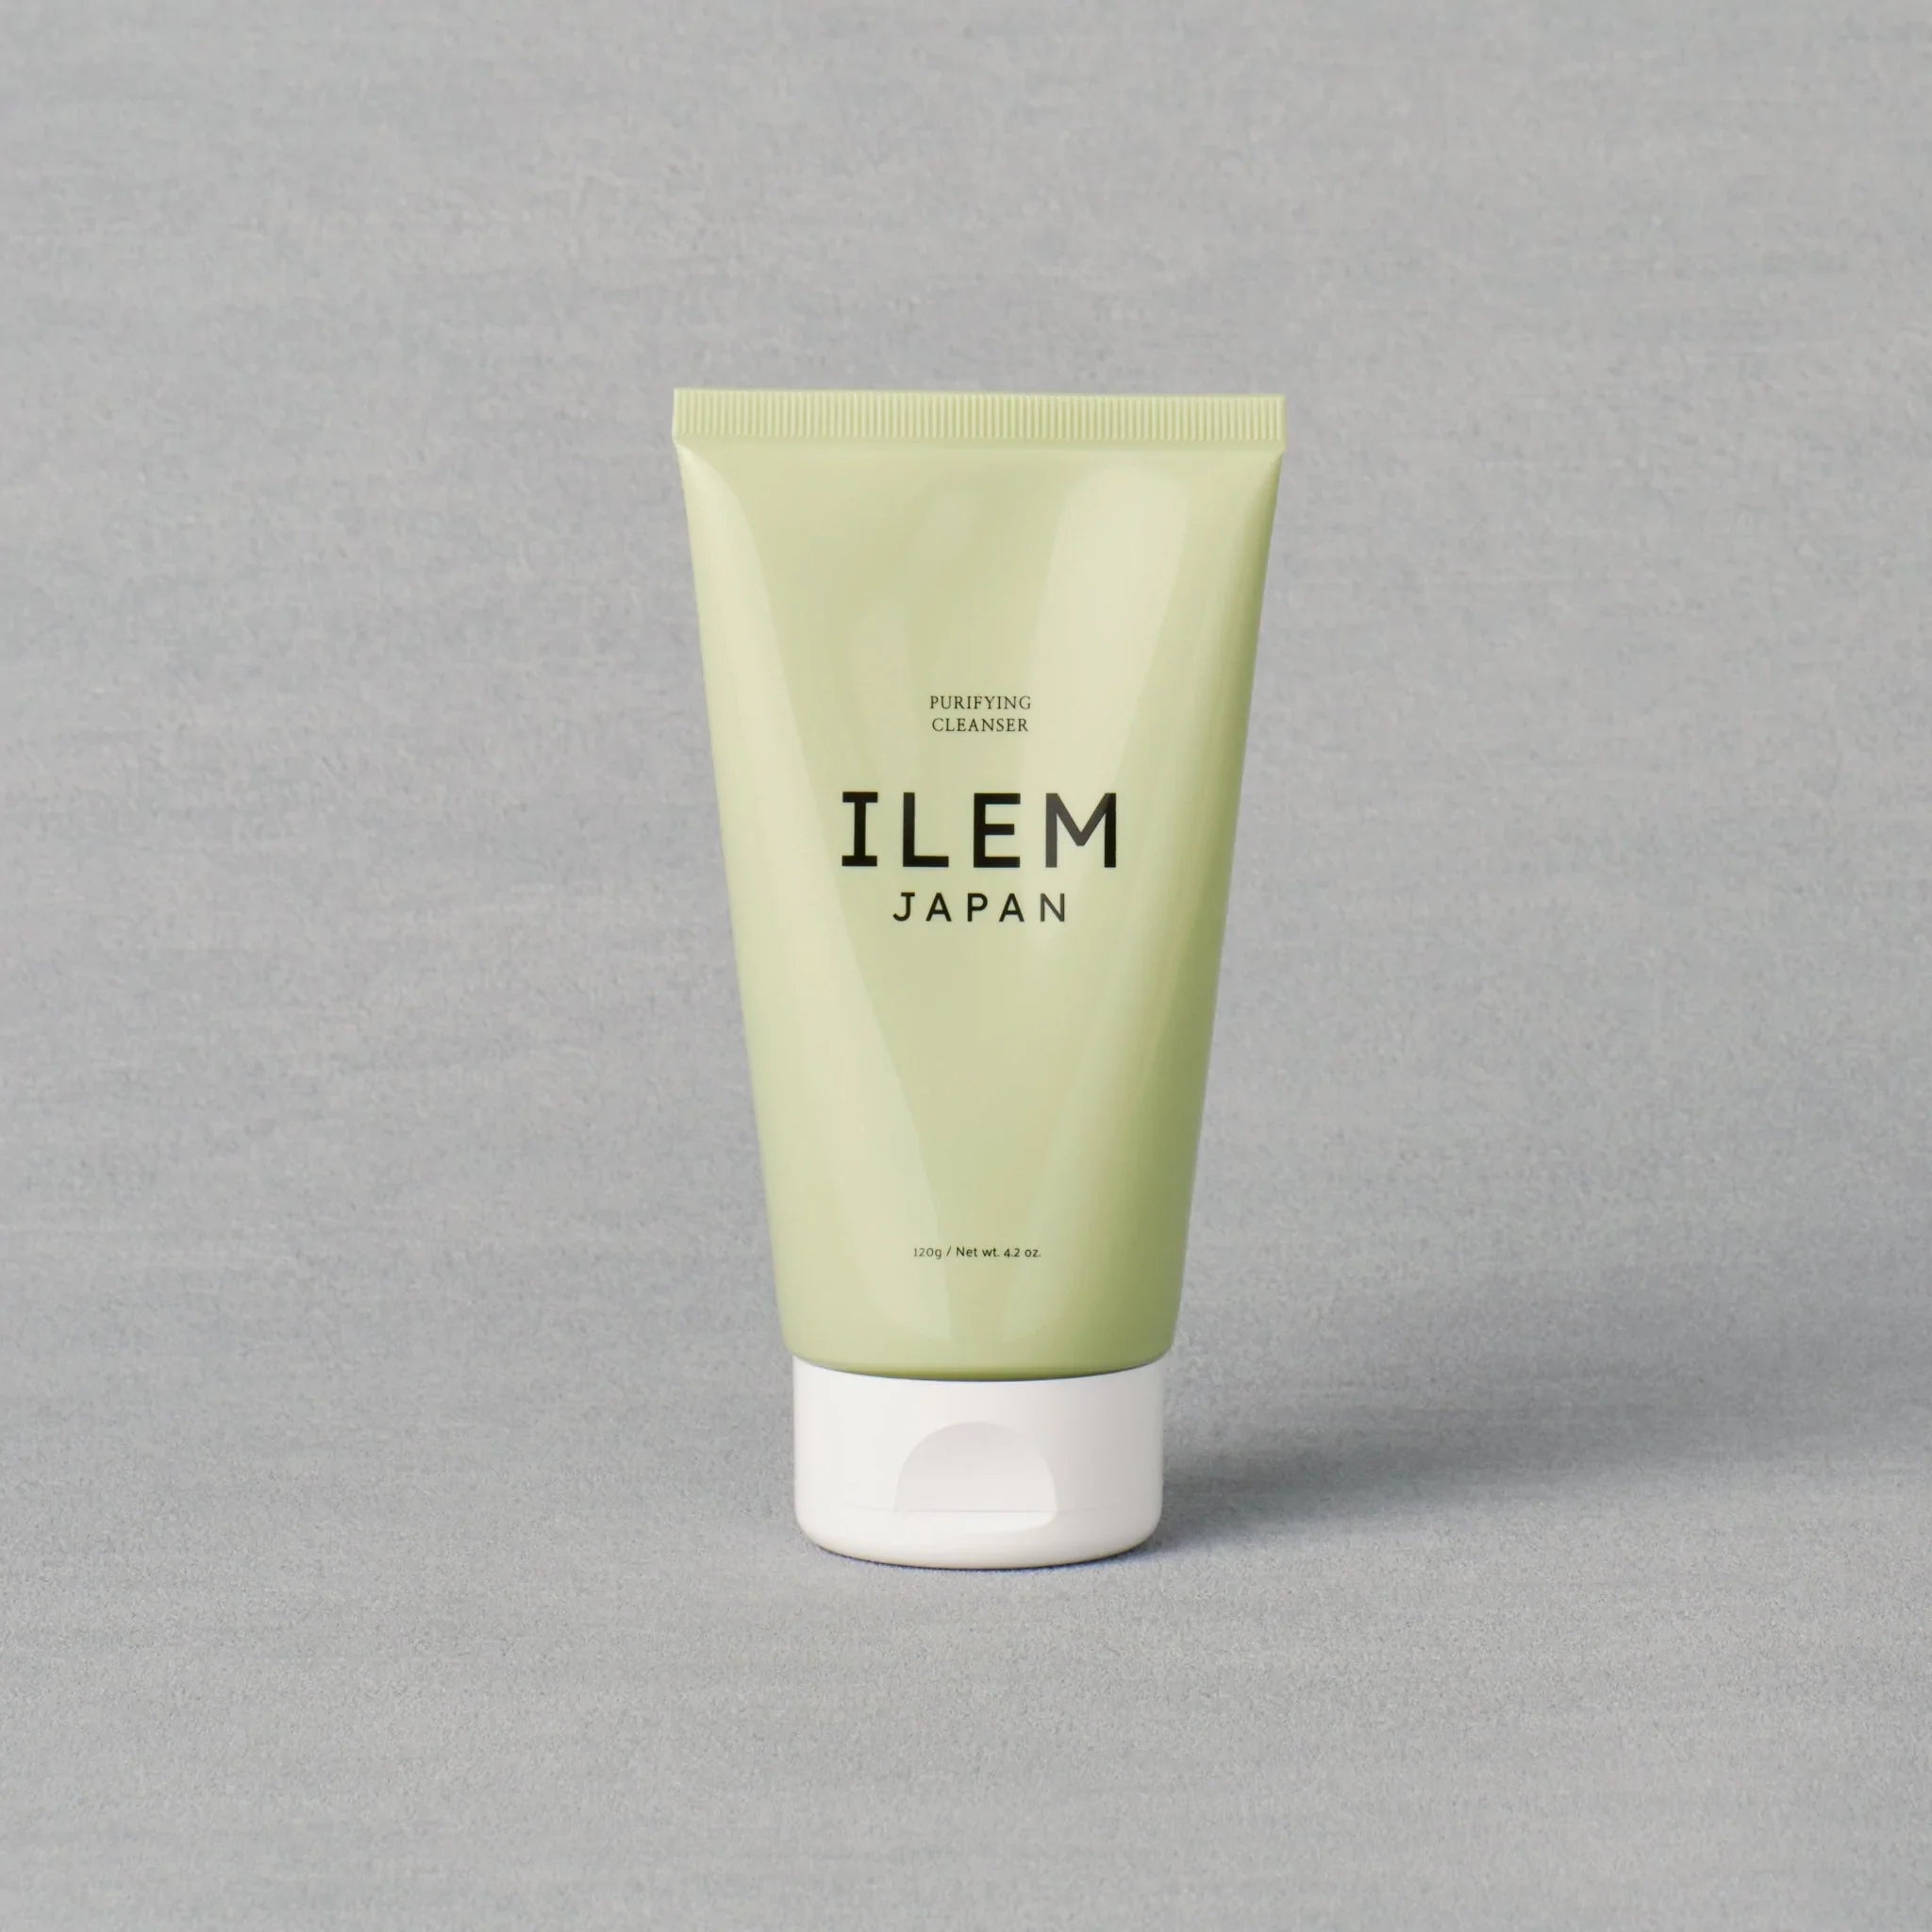 purifying cleanser from ILEM JAPAN